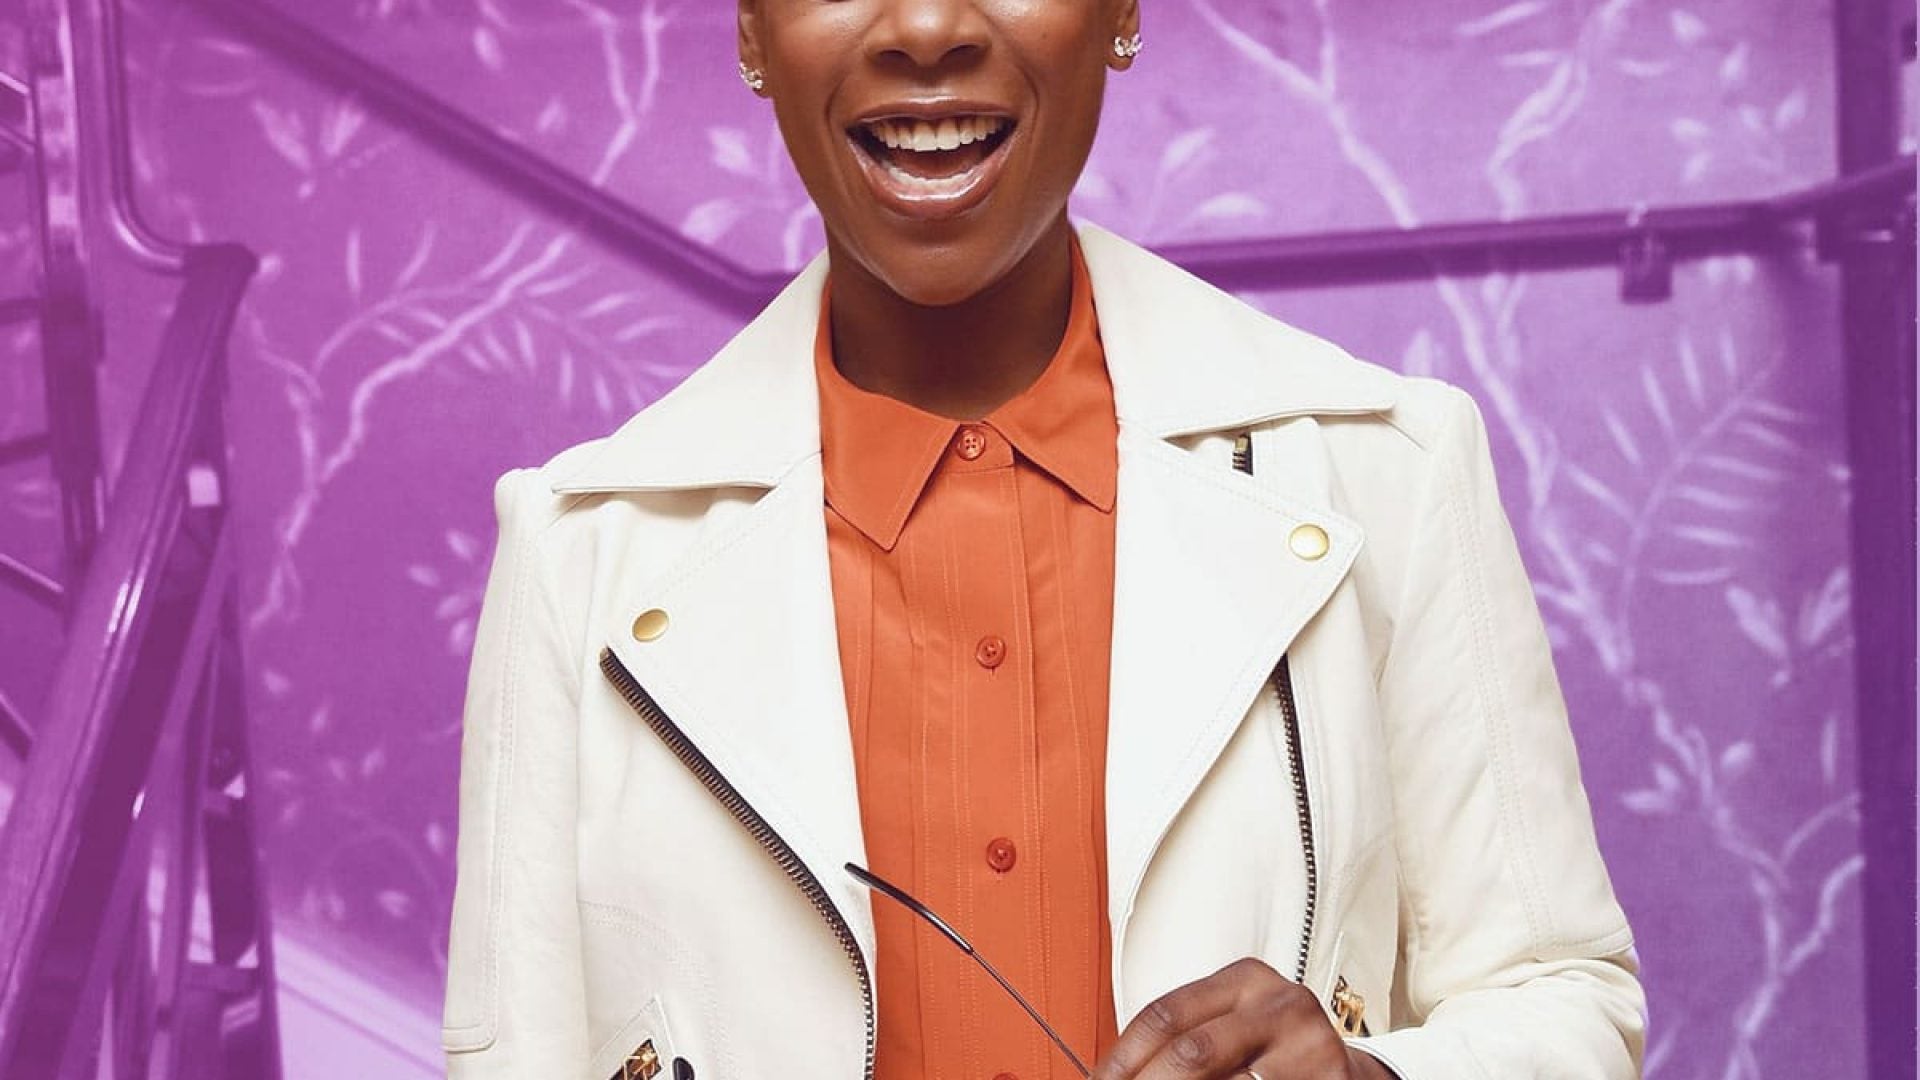 Samira Wiley Has Finally Found Her Voice, And She’s Not Afraid To Use It